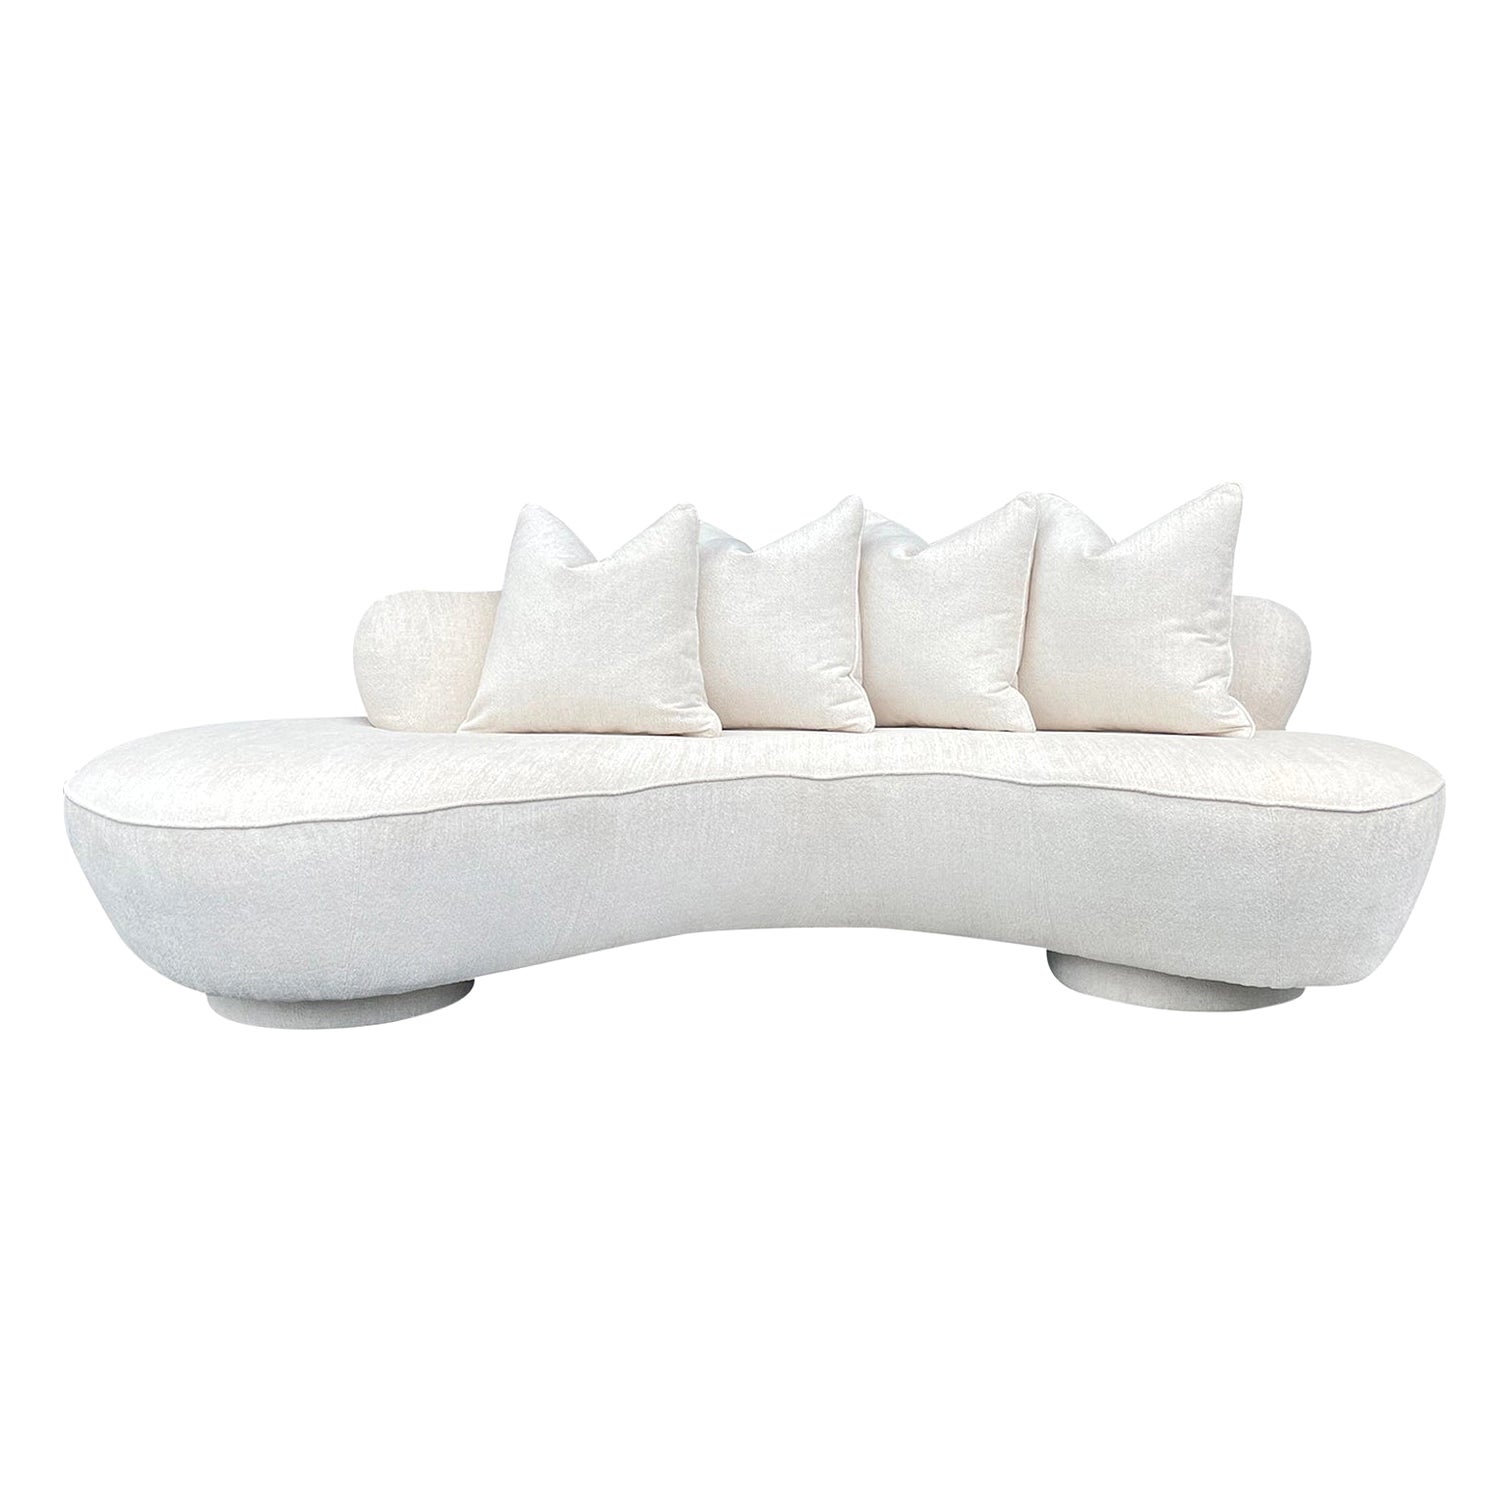 20th Century White American Directional Sofa, Curved Settee by Vladimir Kagan